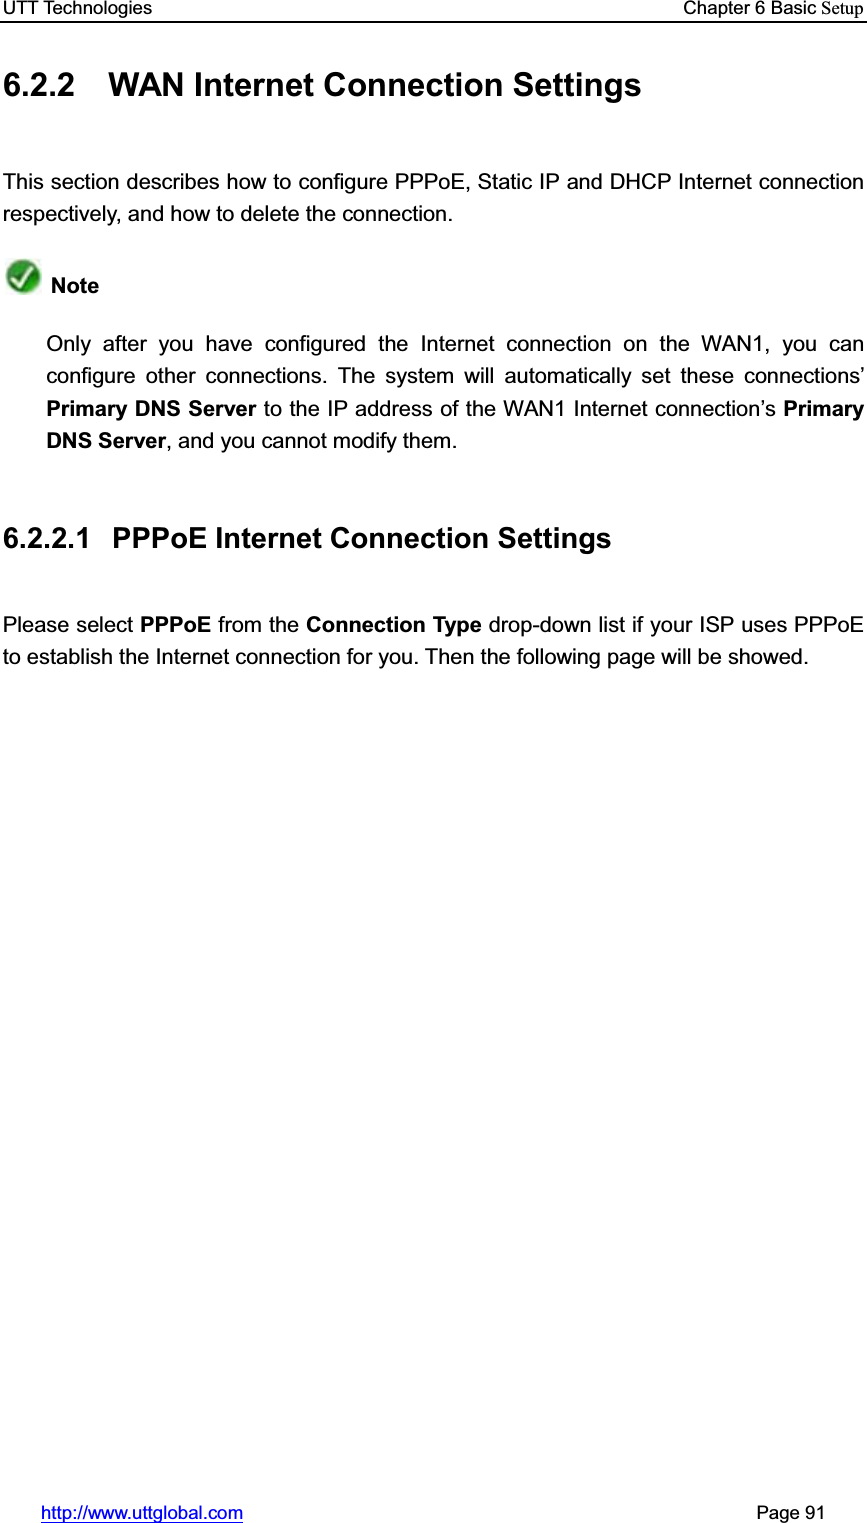 UTT Technologies    Chapter 6 Basic Setuphttp://www.uttglobal.com                                                       Page 91 6.2.2 WAN Internet Connection Settings This section describes how to configure PPPoE, Static IP and DHCP Internet connection respectively, and how to delete the connection. NoteOnly after you have configured the Internet connection on the WAN1, you can configure other connections. The system will automatically set these connections¶Primary DNS Server to the IP address of the WAN1 Internet connection¶sPrimary DNS Server, and you cannot modify them. 6.2.2.1  PPPoE Internet Connection Settings Please select PPPoE from the Connection Type drop-down list if your ISP uses PPPoE to establish the Internet connection for you. Then the following page will be showed. 